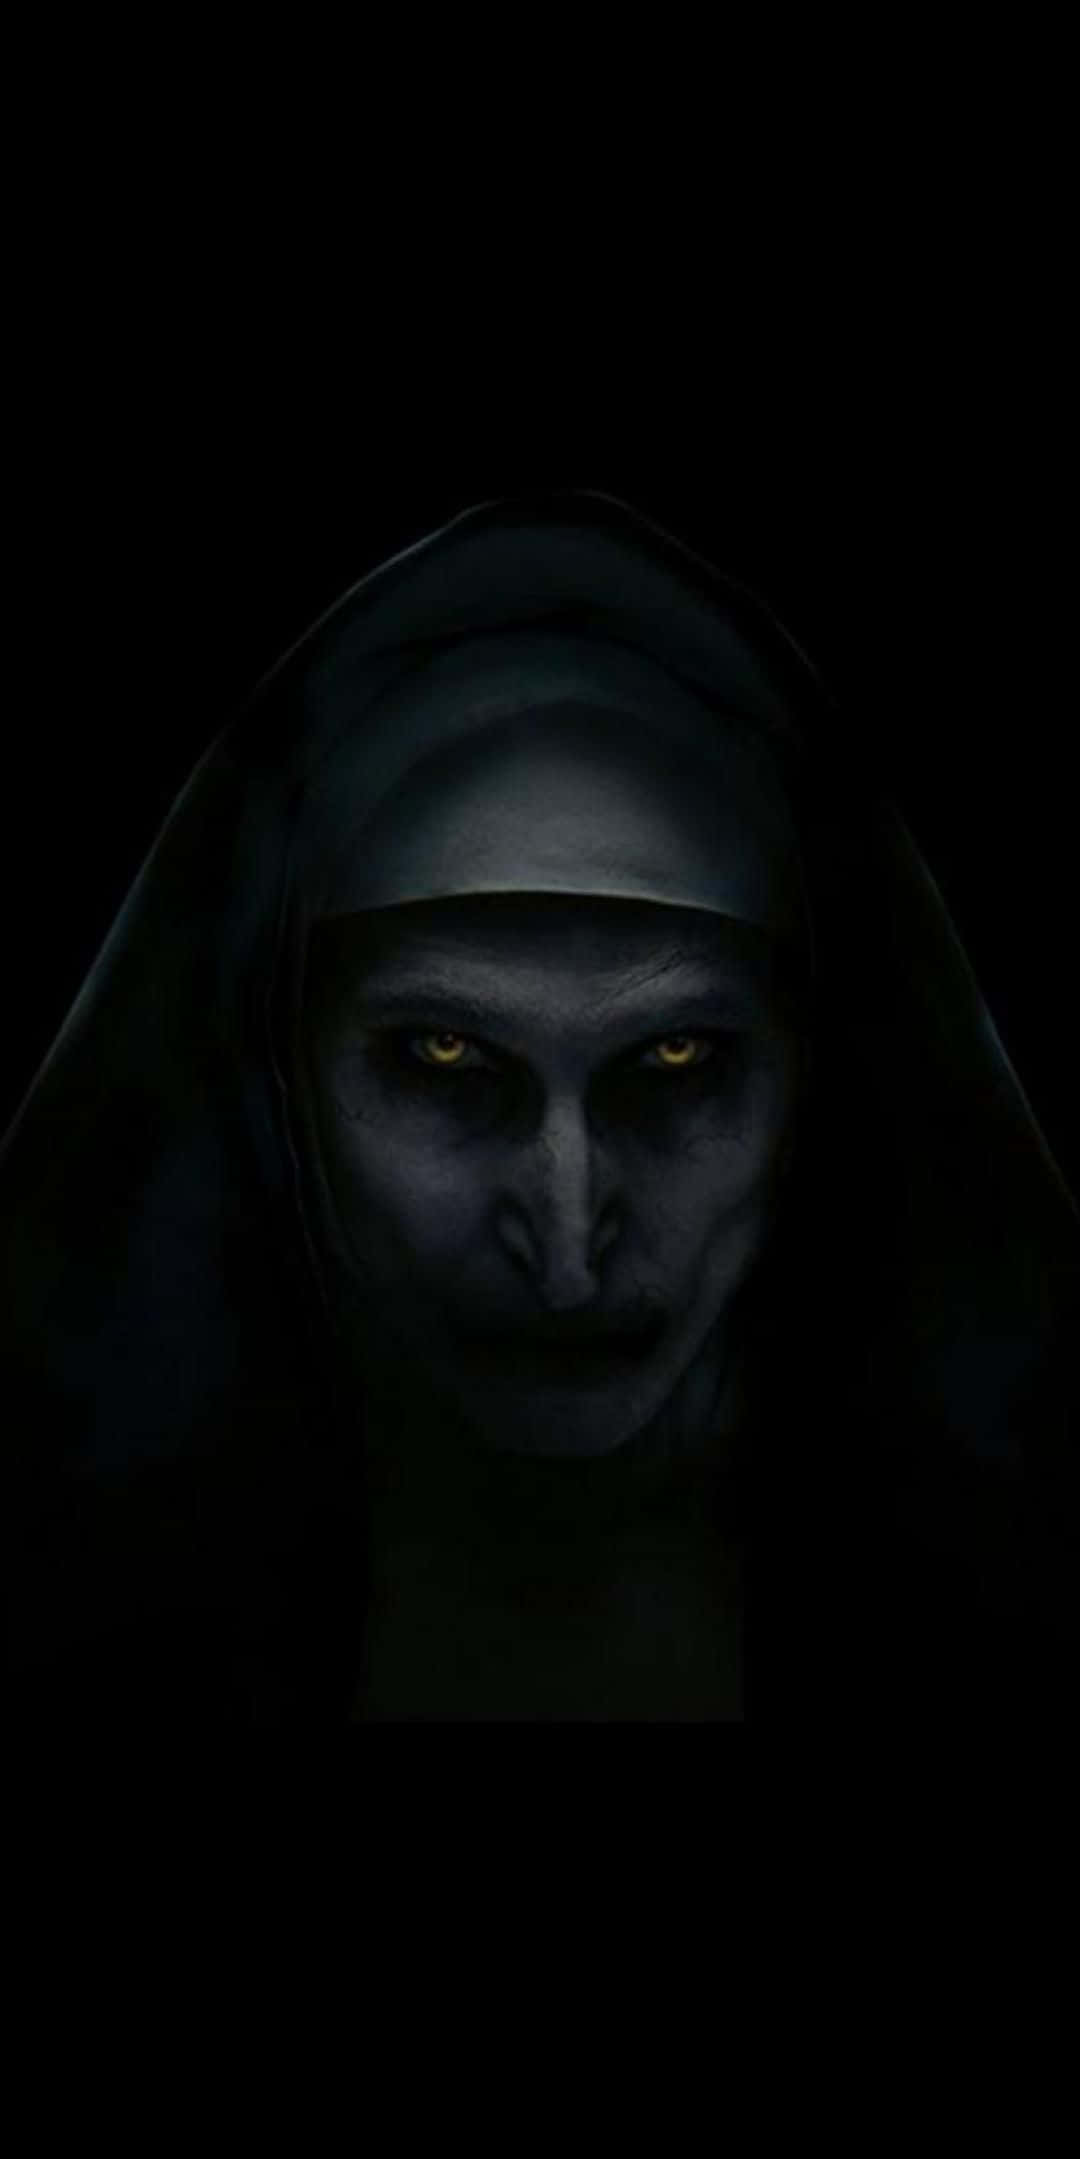 The Nun In The Dark With A Black Background Wallpaper